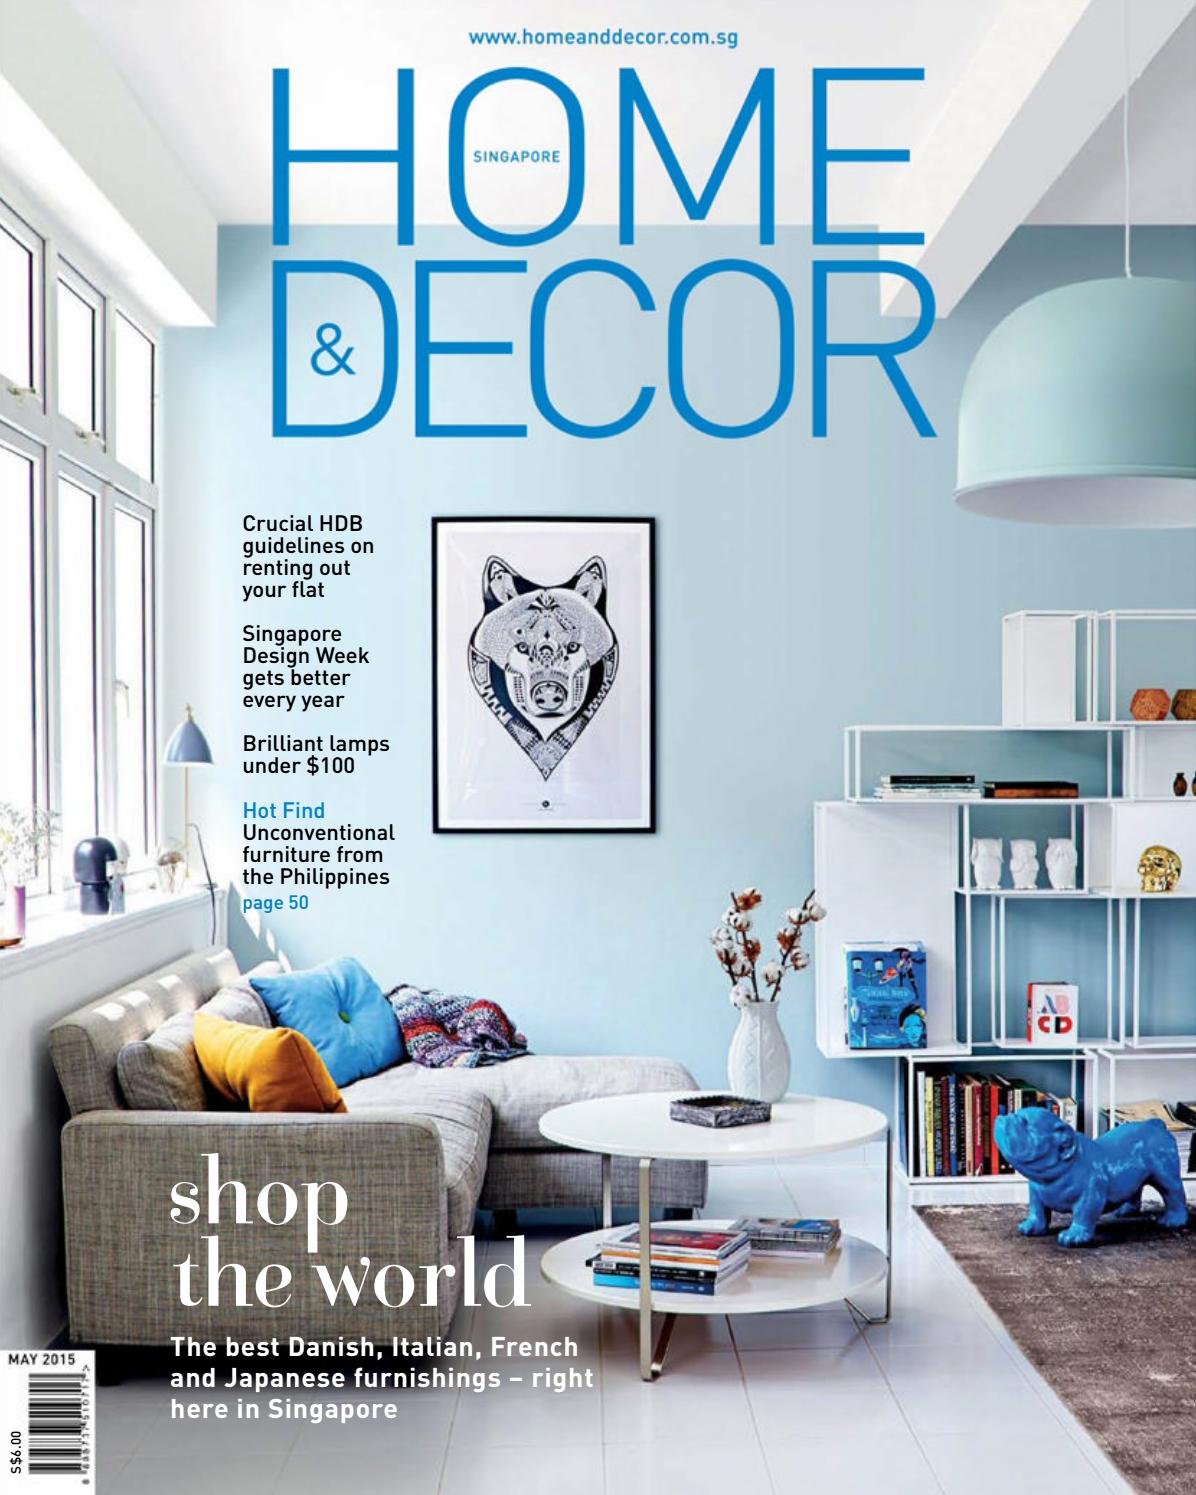 Cb2 Fireplace Screen Lovely Home & Decor May 2015 by à¹à¸¡à¸µà¹à¸¢à¸ à¸à¸£à¹à¸° issuu